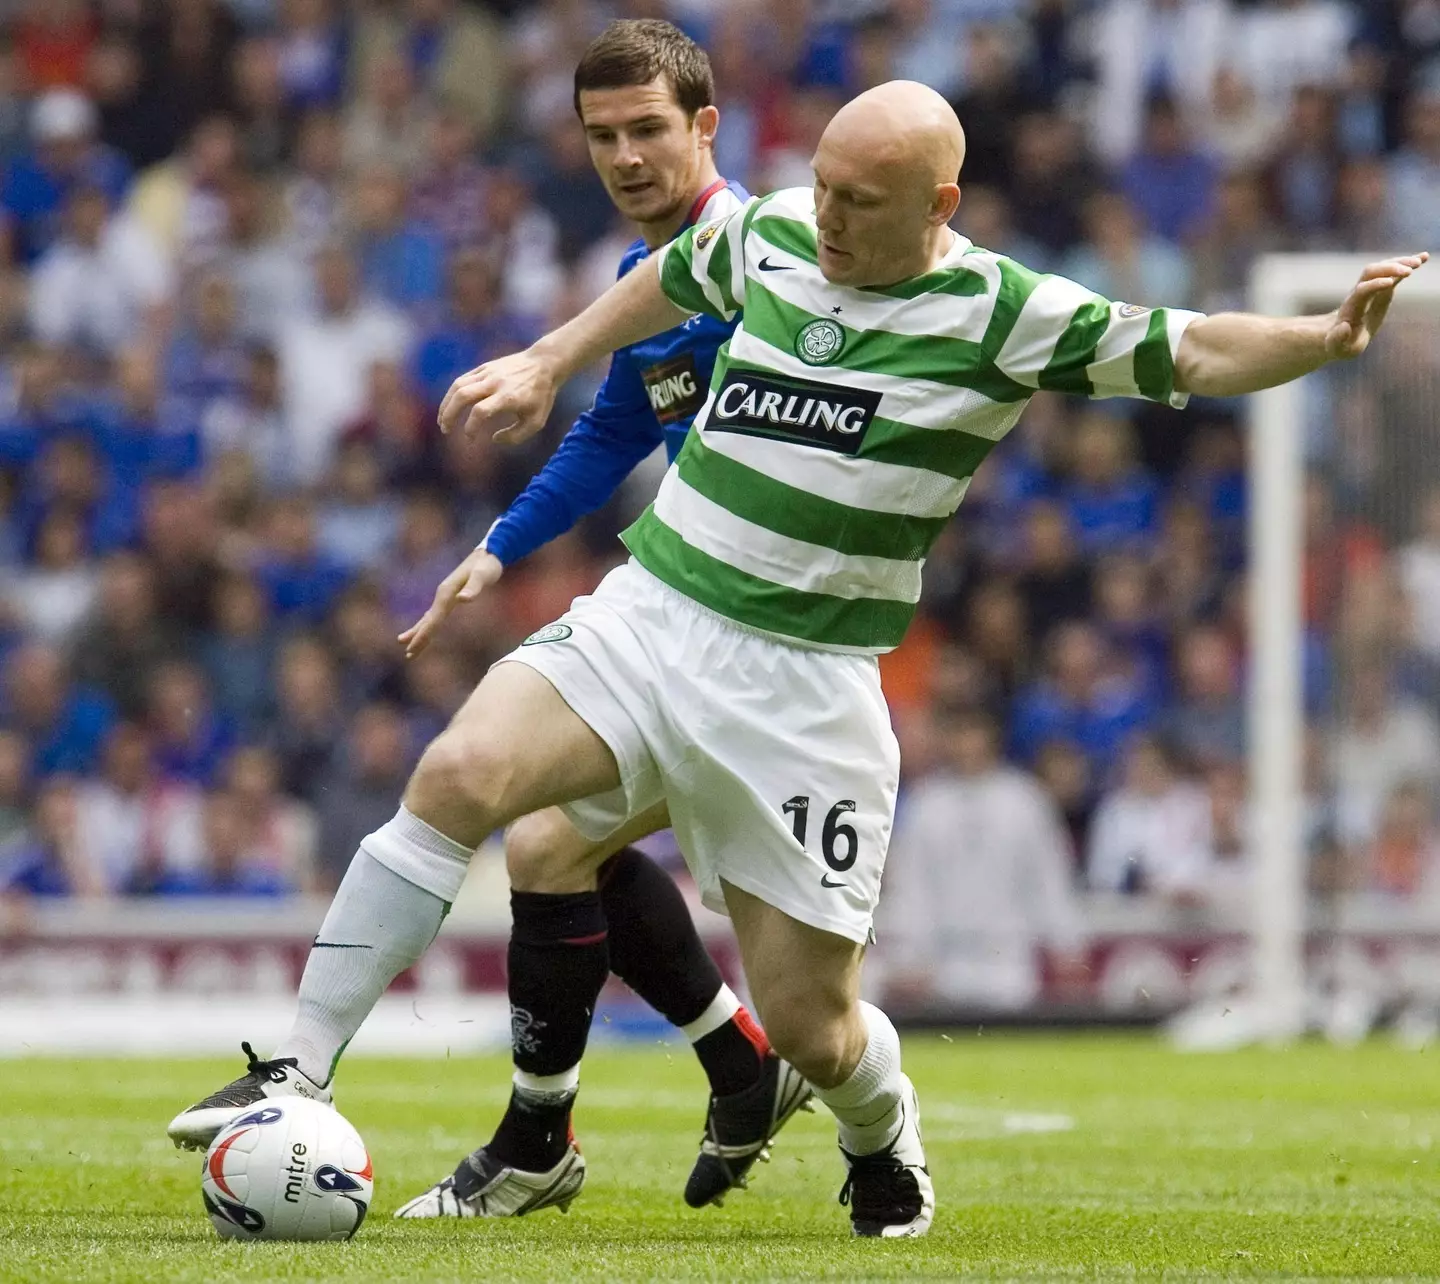 Denmark's Thomas Gravesen was allegedly known for swindling his Celtic teammates. (